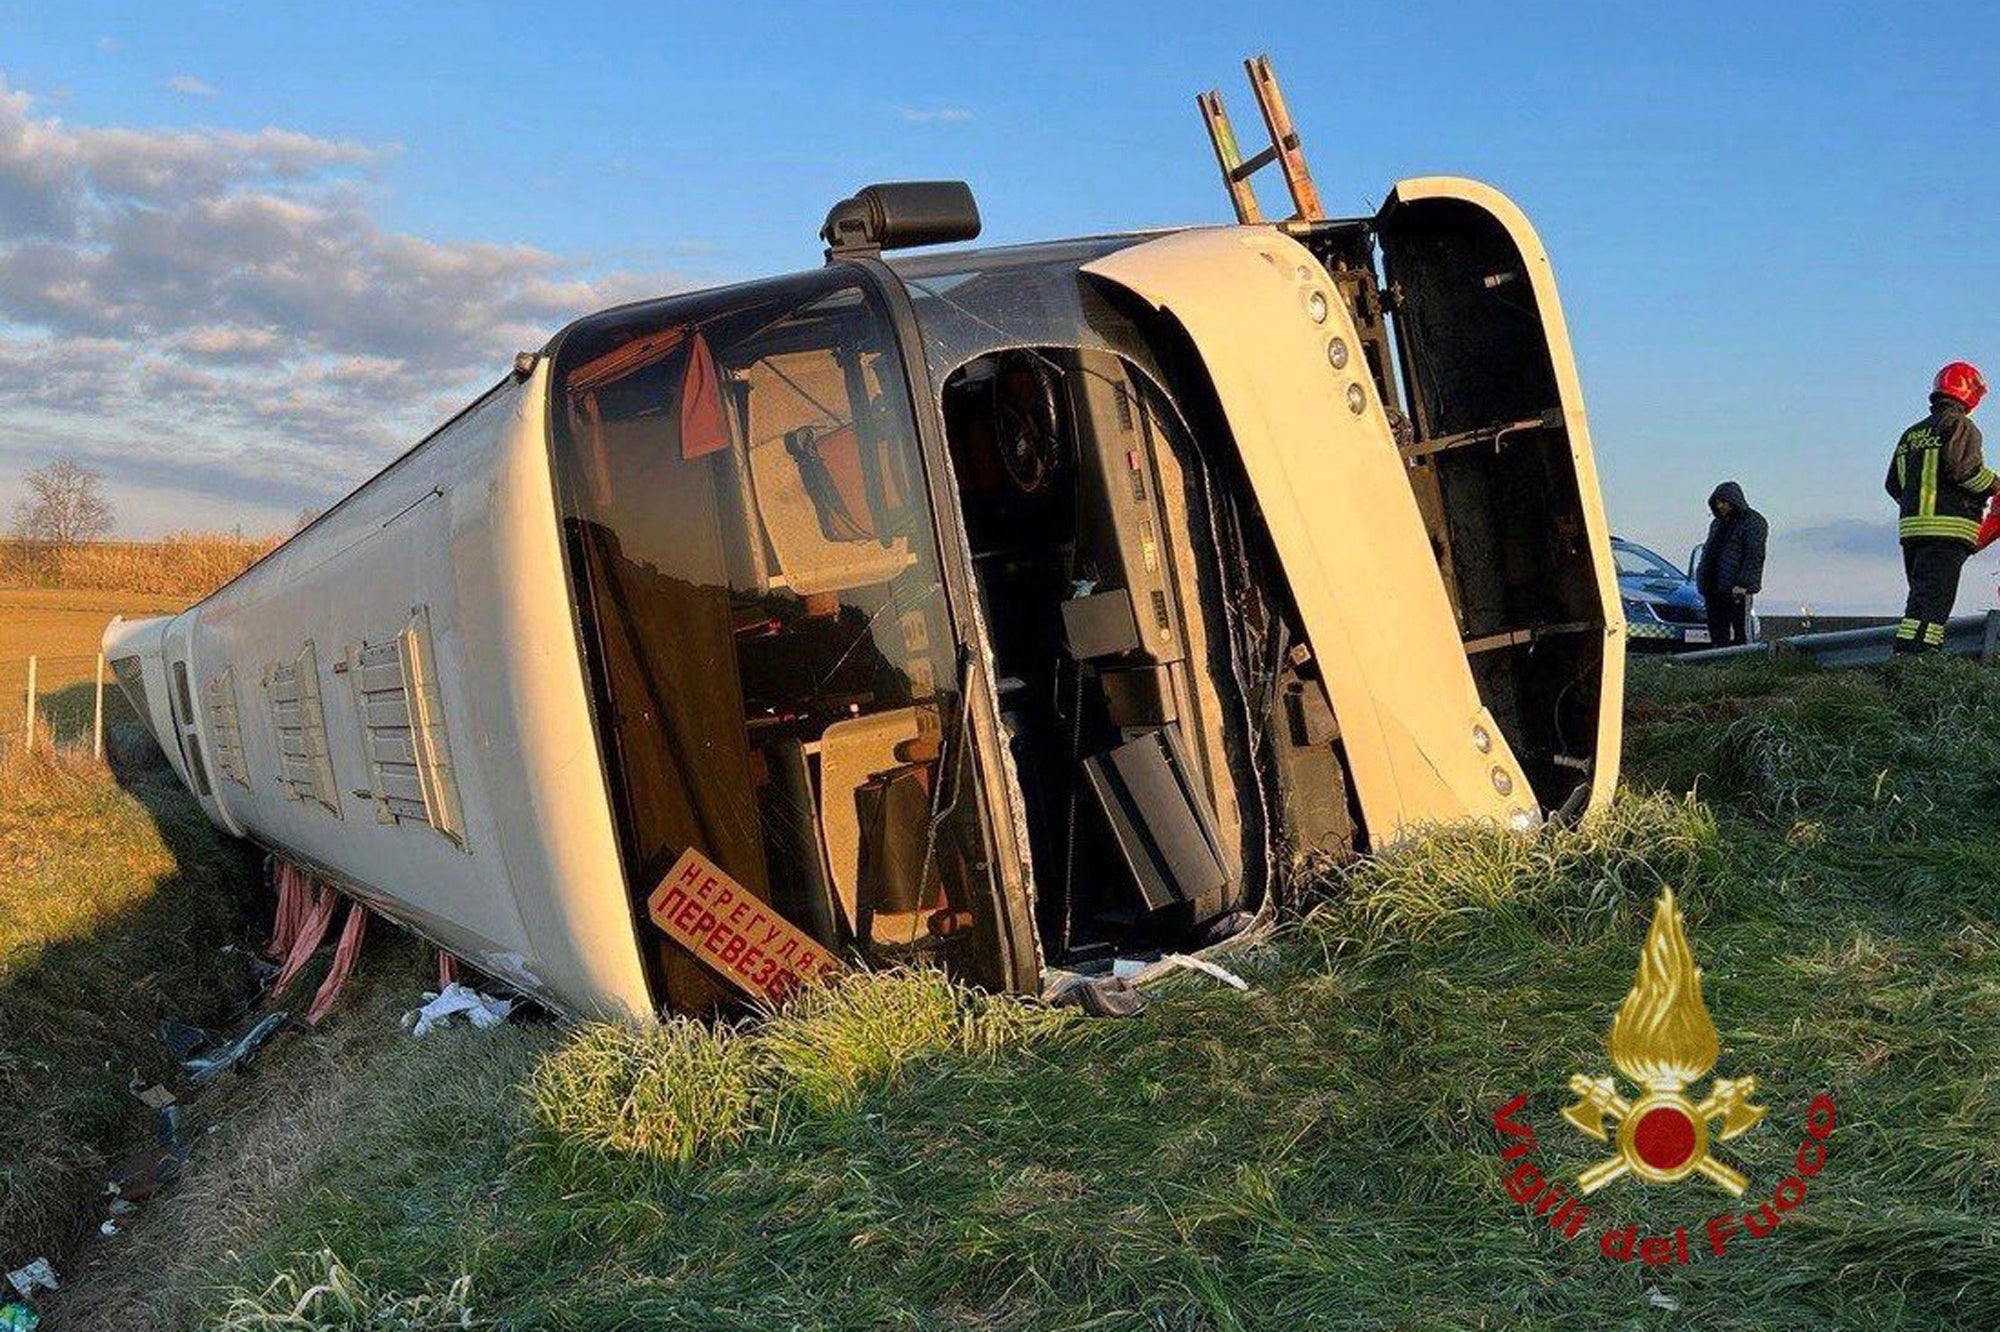 A woman has died and several others are injured after a bus with Ukrainian nationals overturned in Italy